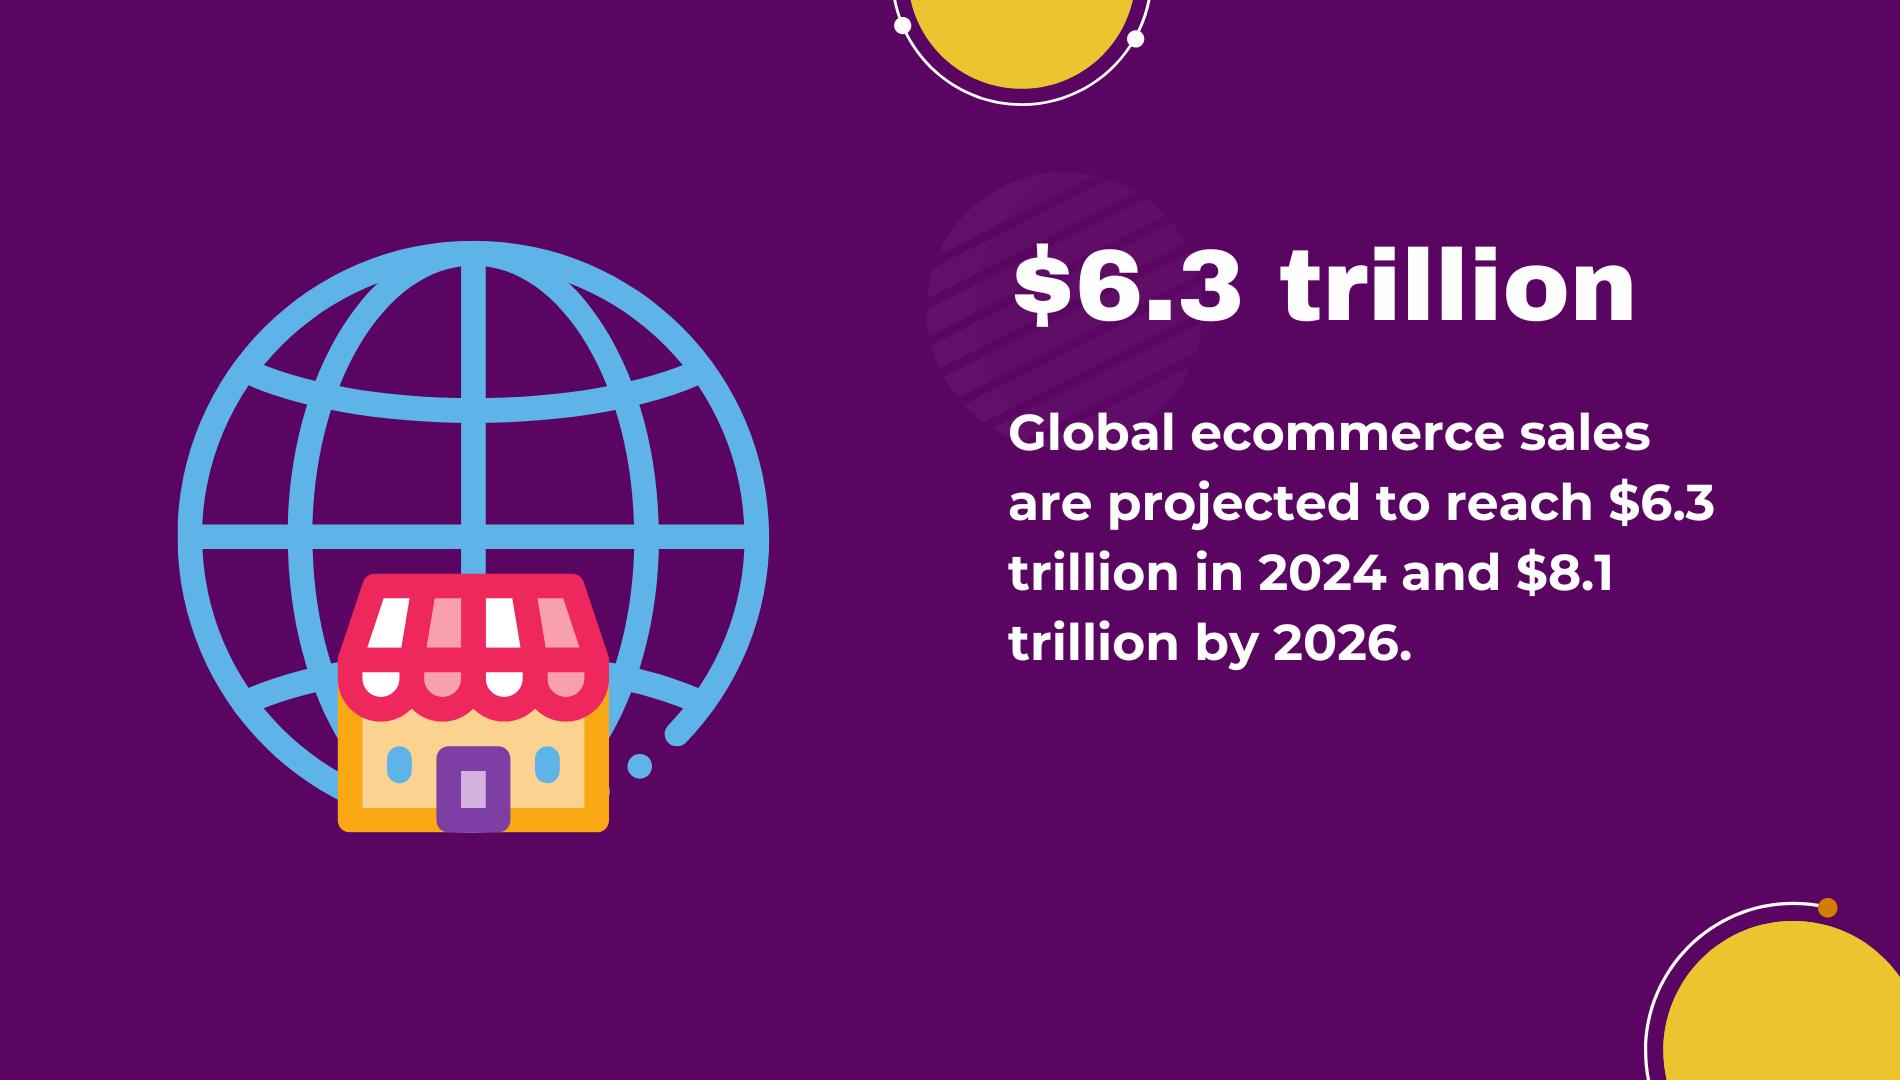 Global ecommerce sales are projected to reach $6.3 trillion in 2024 and $8.1 trillion by 2026